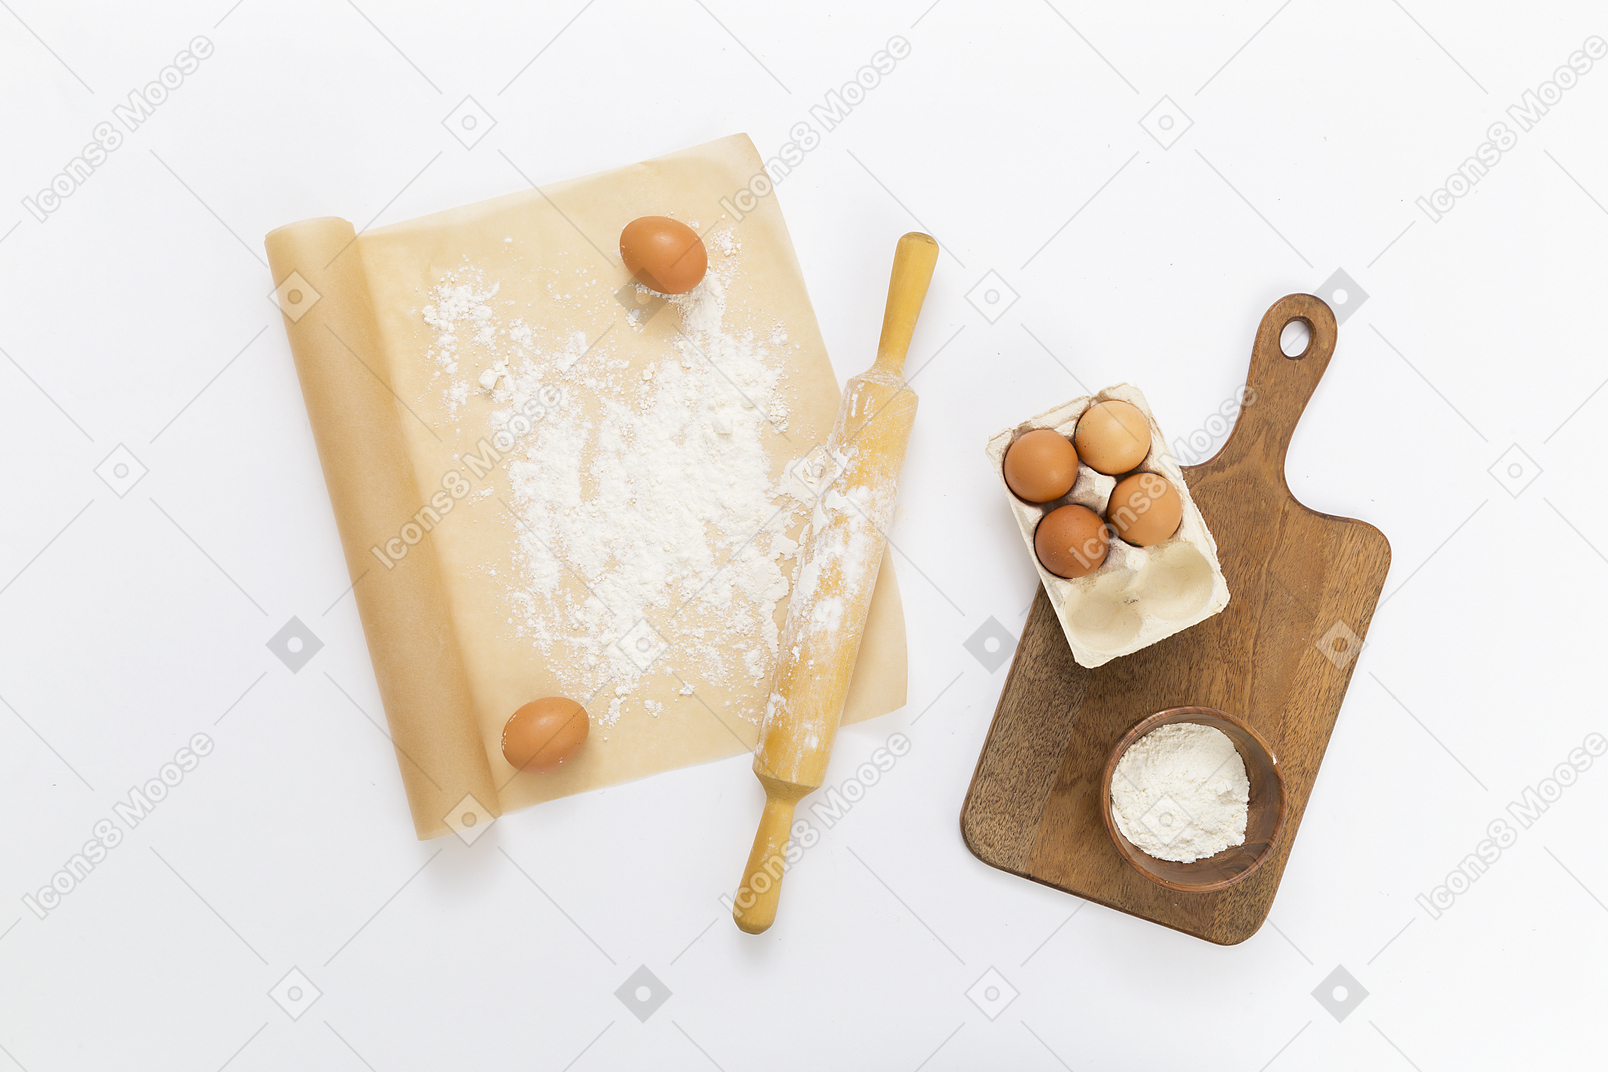 Baking paper, rolling pin, eggs and cutting board